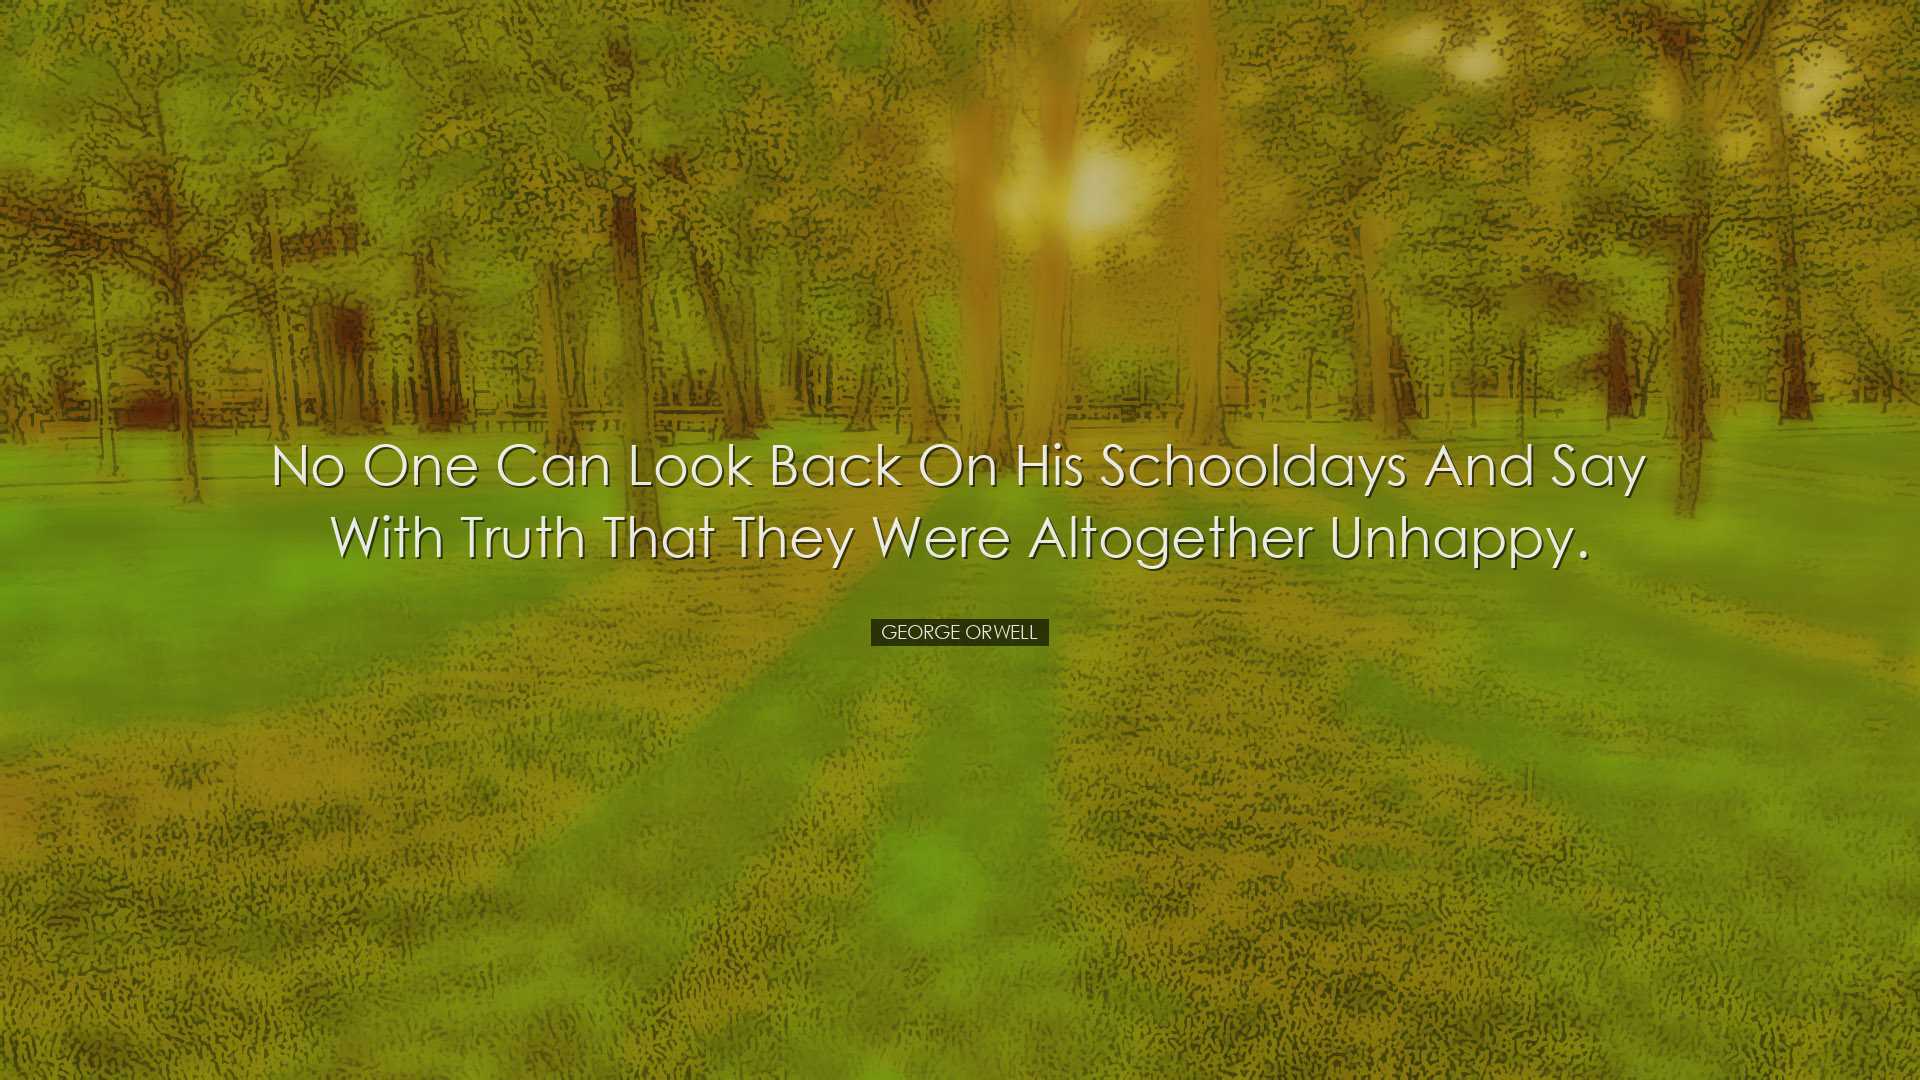 No one can look back on his schooldays and say with truth that the